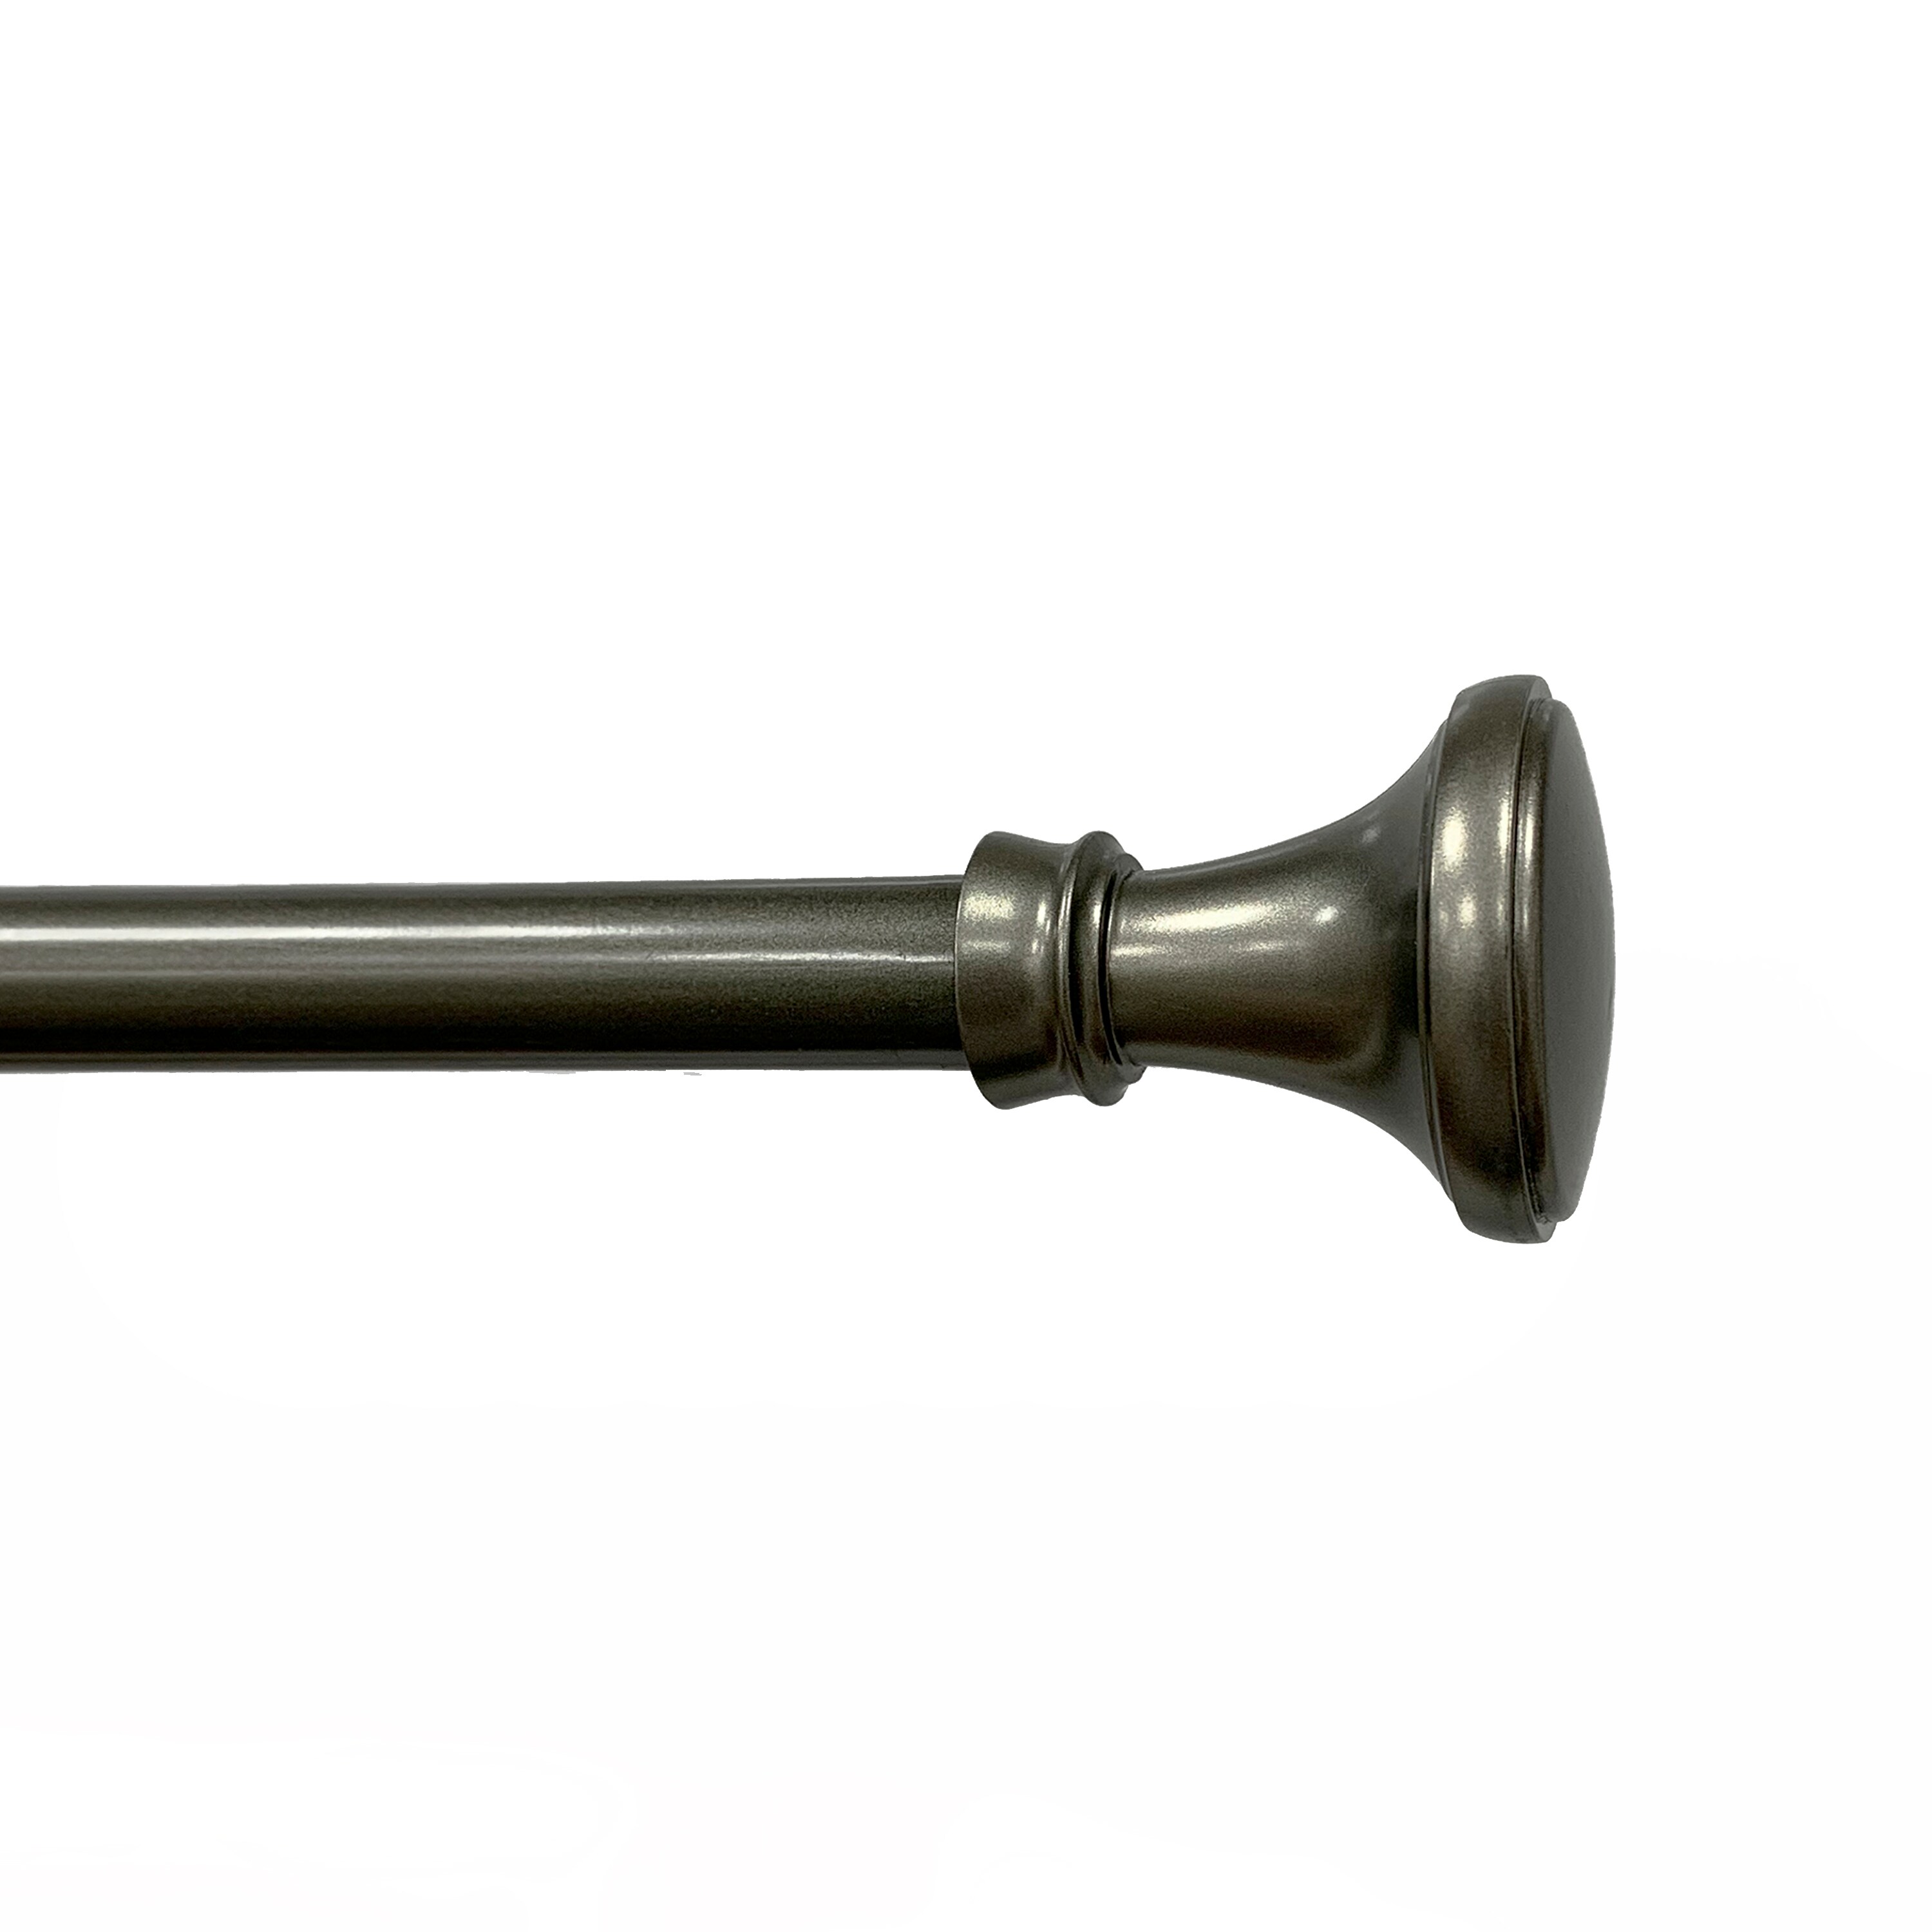 Pewter Pedestal Finials Adjustable Curtain Rod With Hardware 